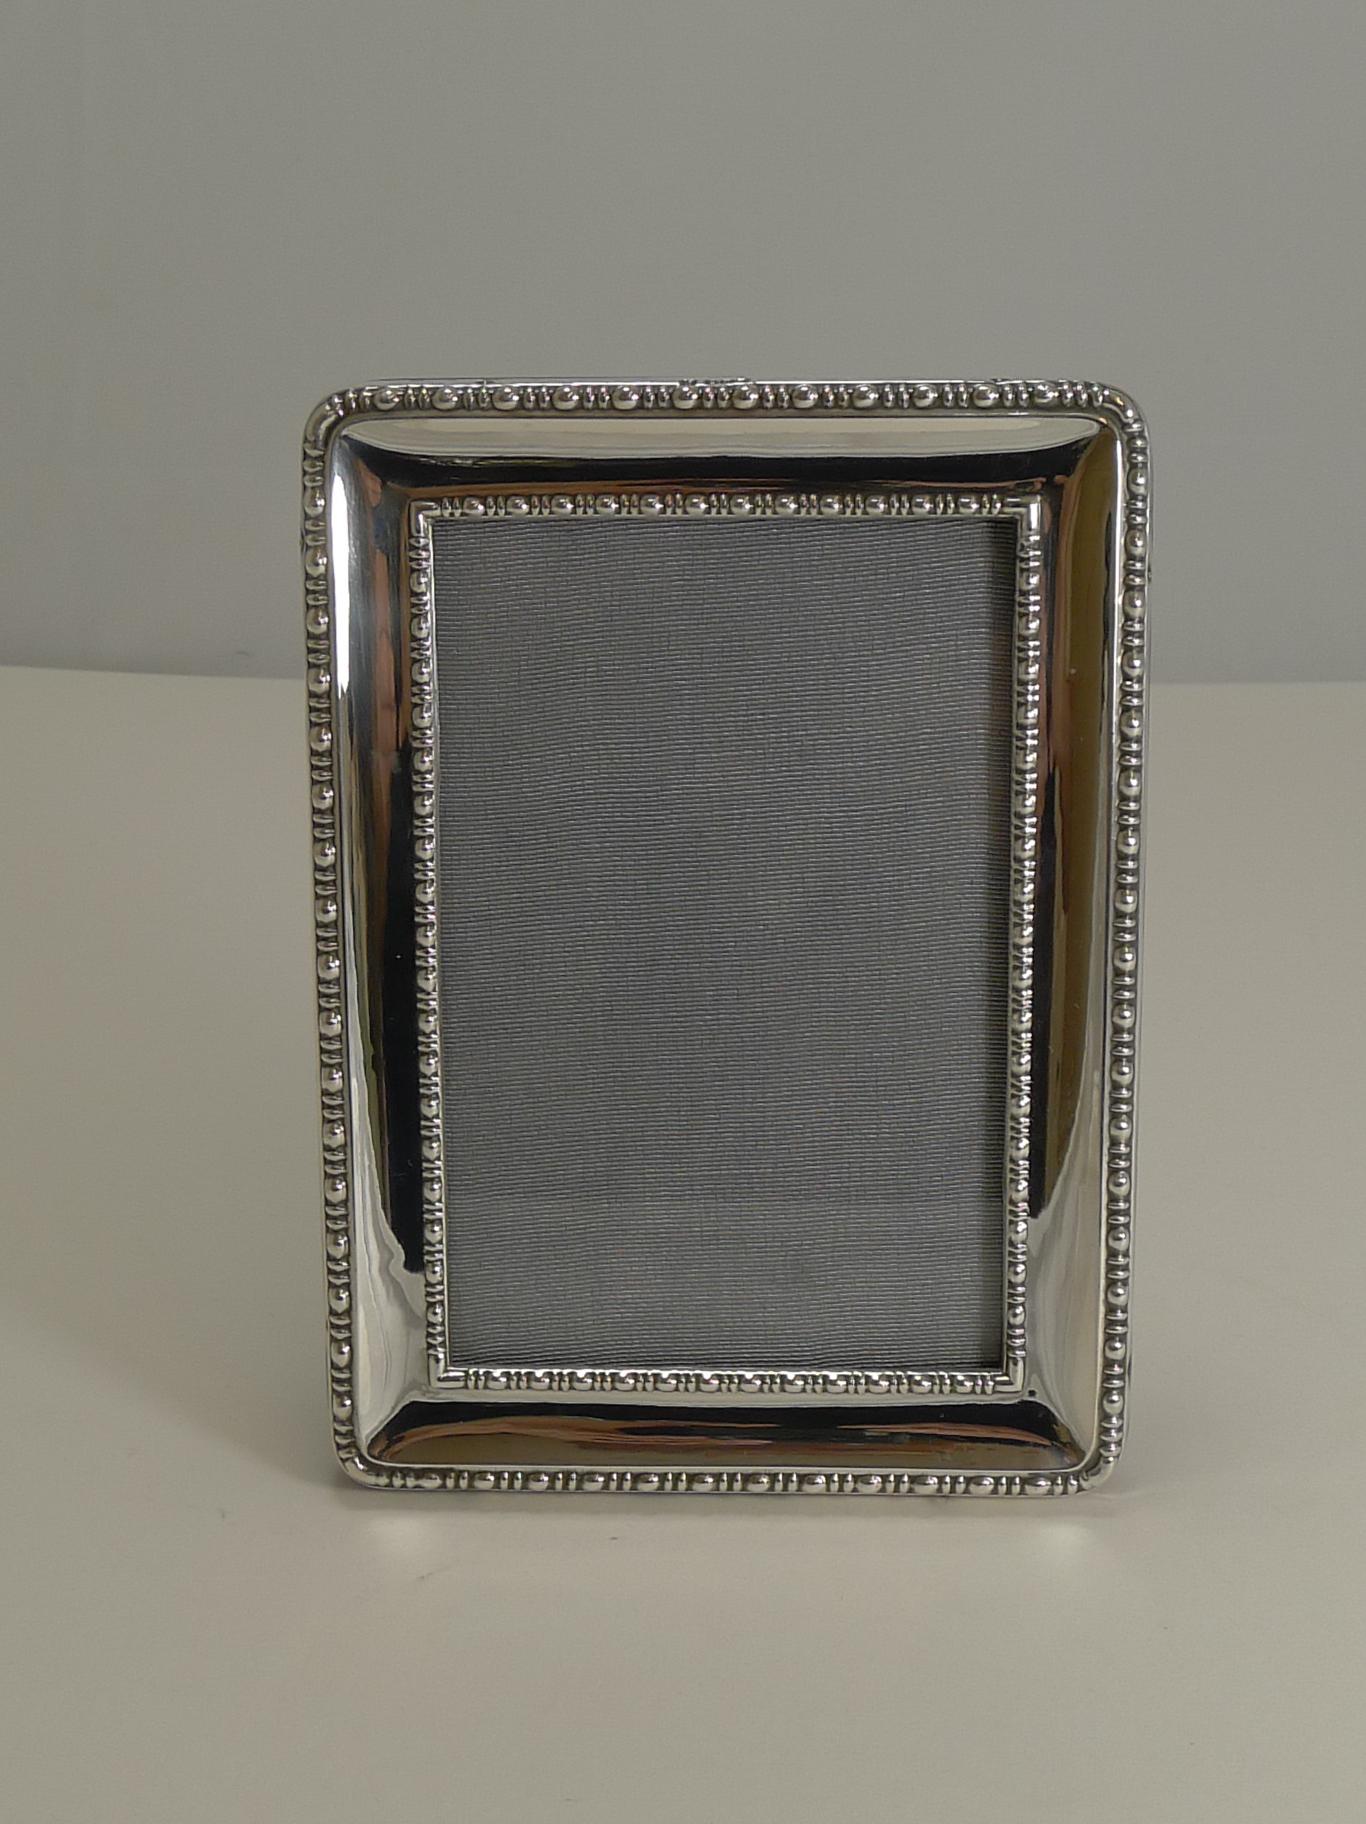 A superb and very smart antique English photograph frame, 100 years old this year with a full English hallmark for Sheffield 1918. The maker's mark is also present for the well renowned silversmith, James Deakin & Sons - John & William Deakin.

It